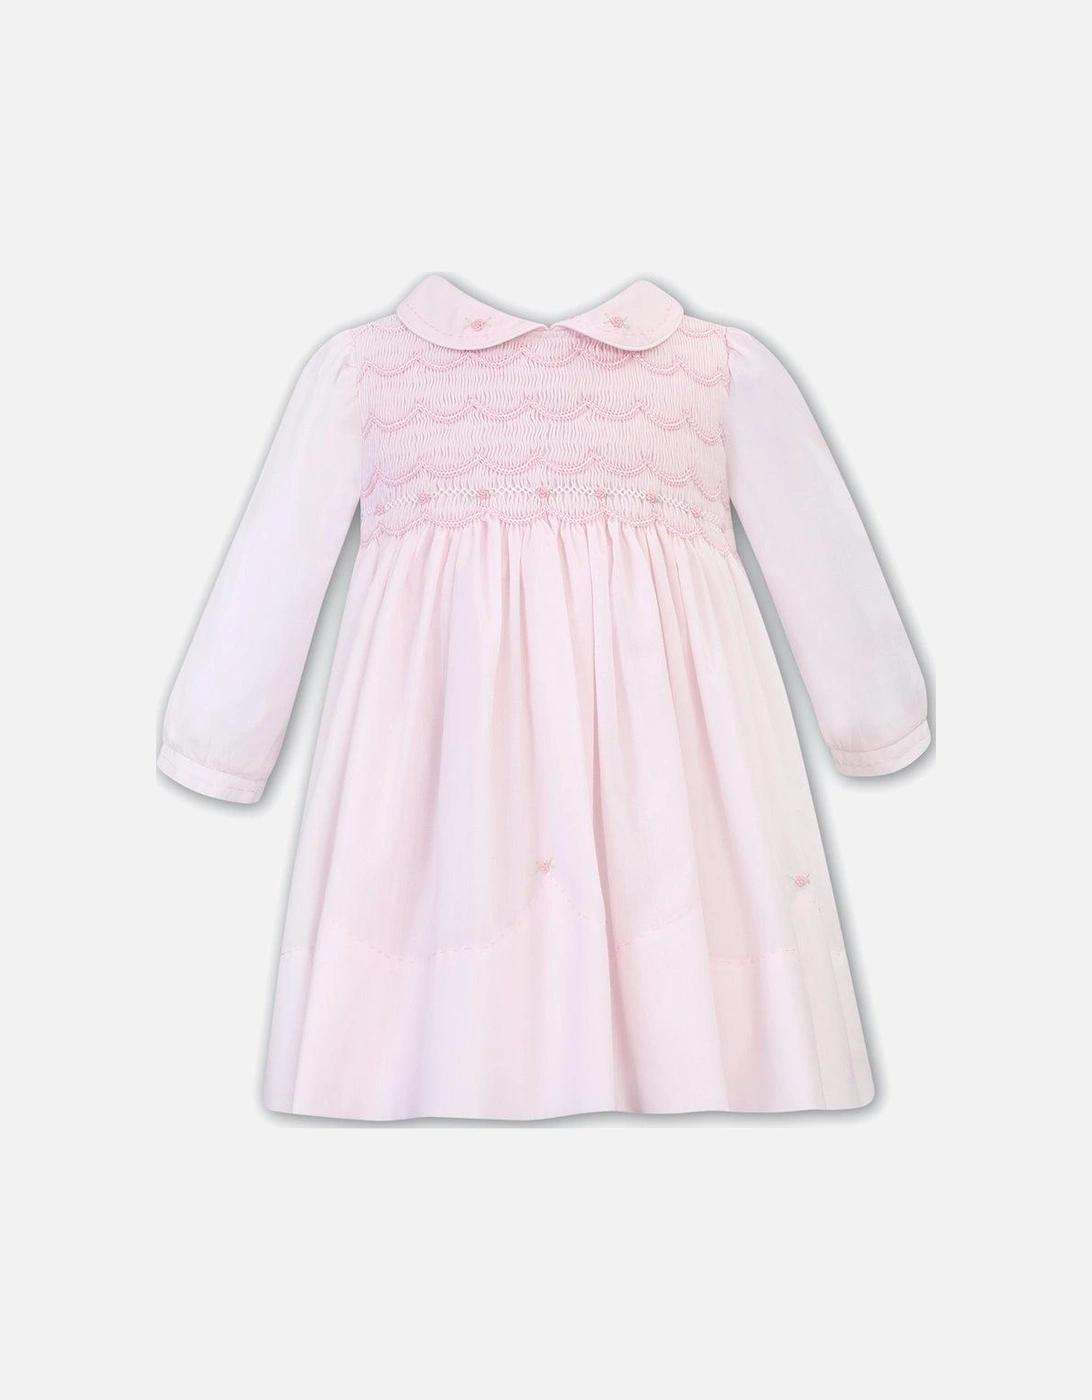 Girls Pink embroided Dress, 2 of 1